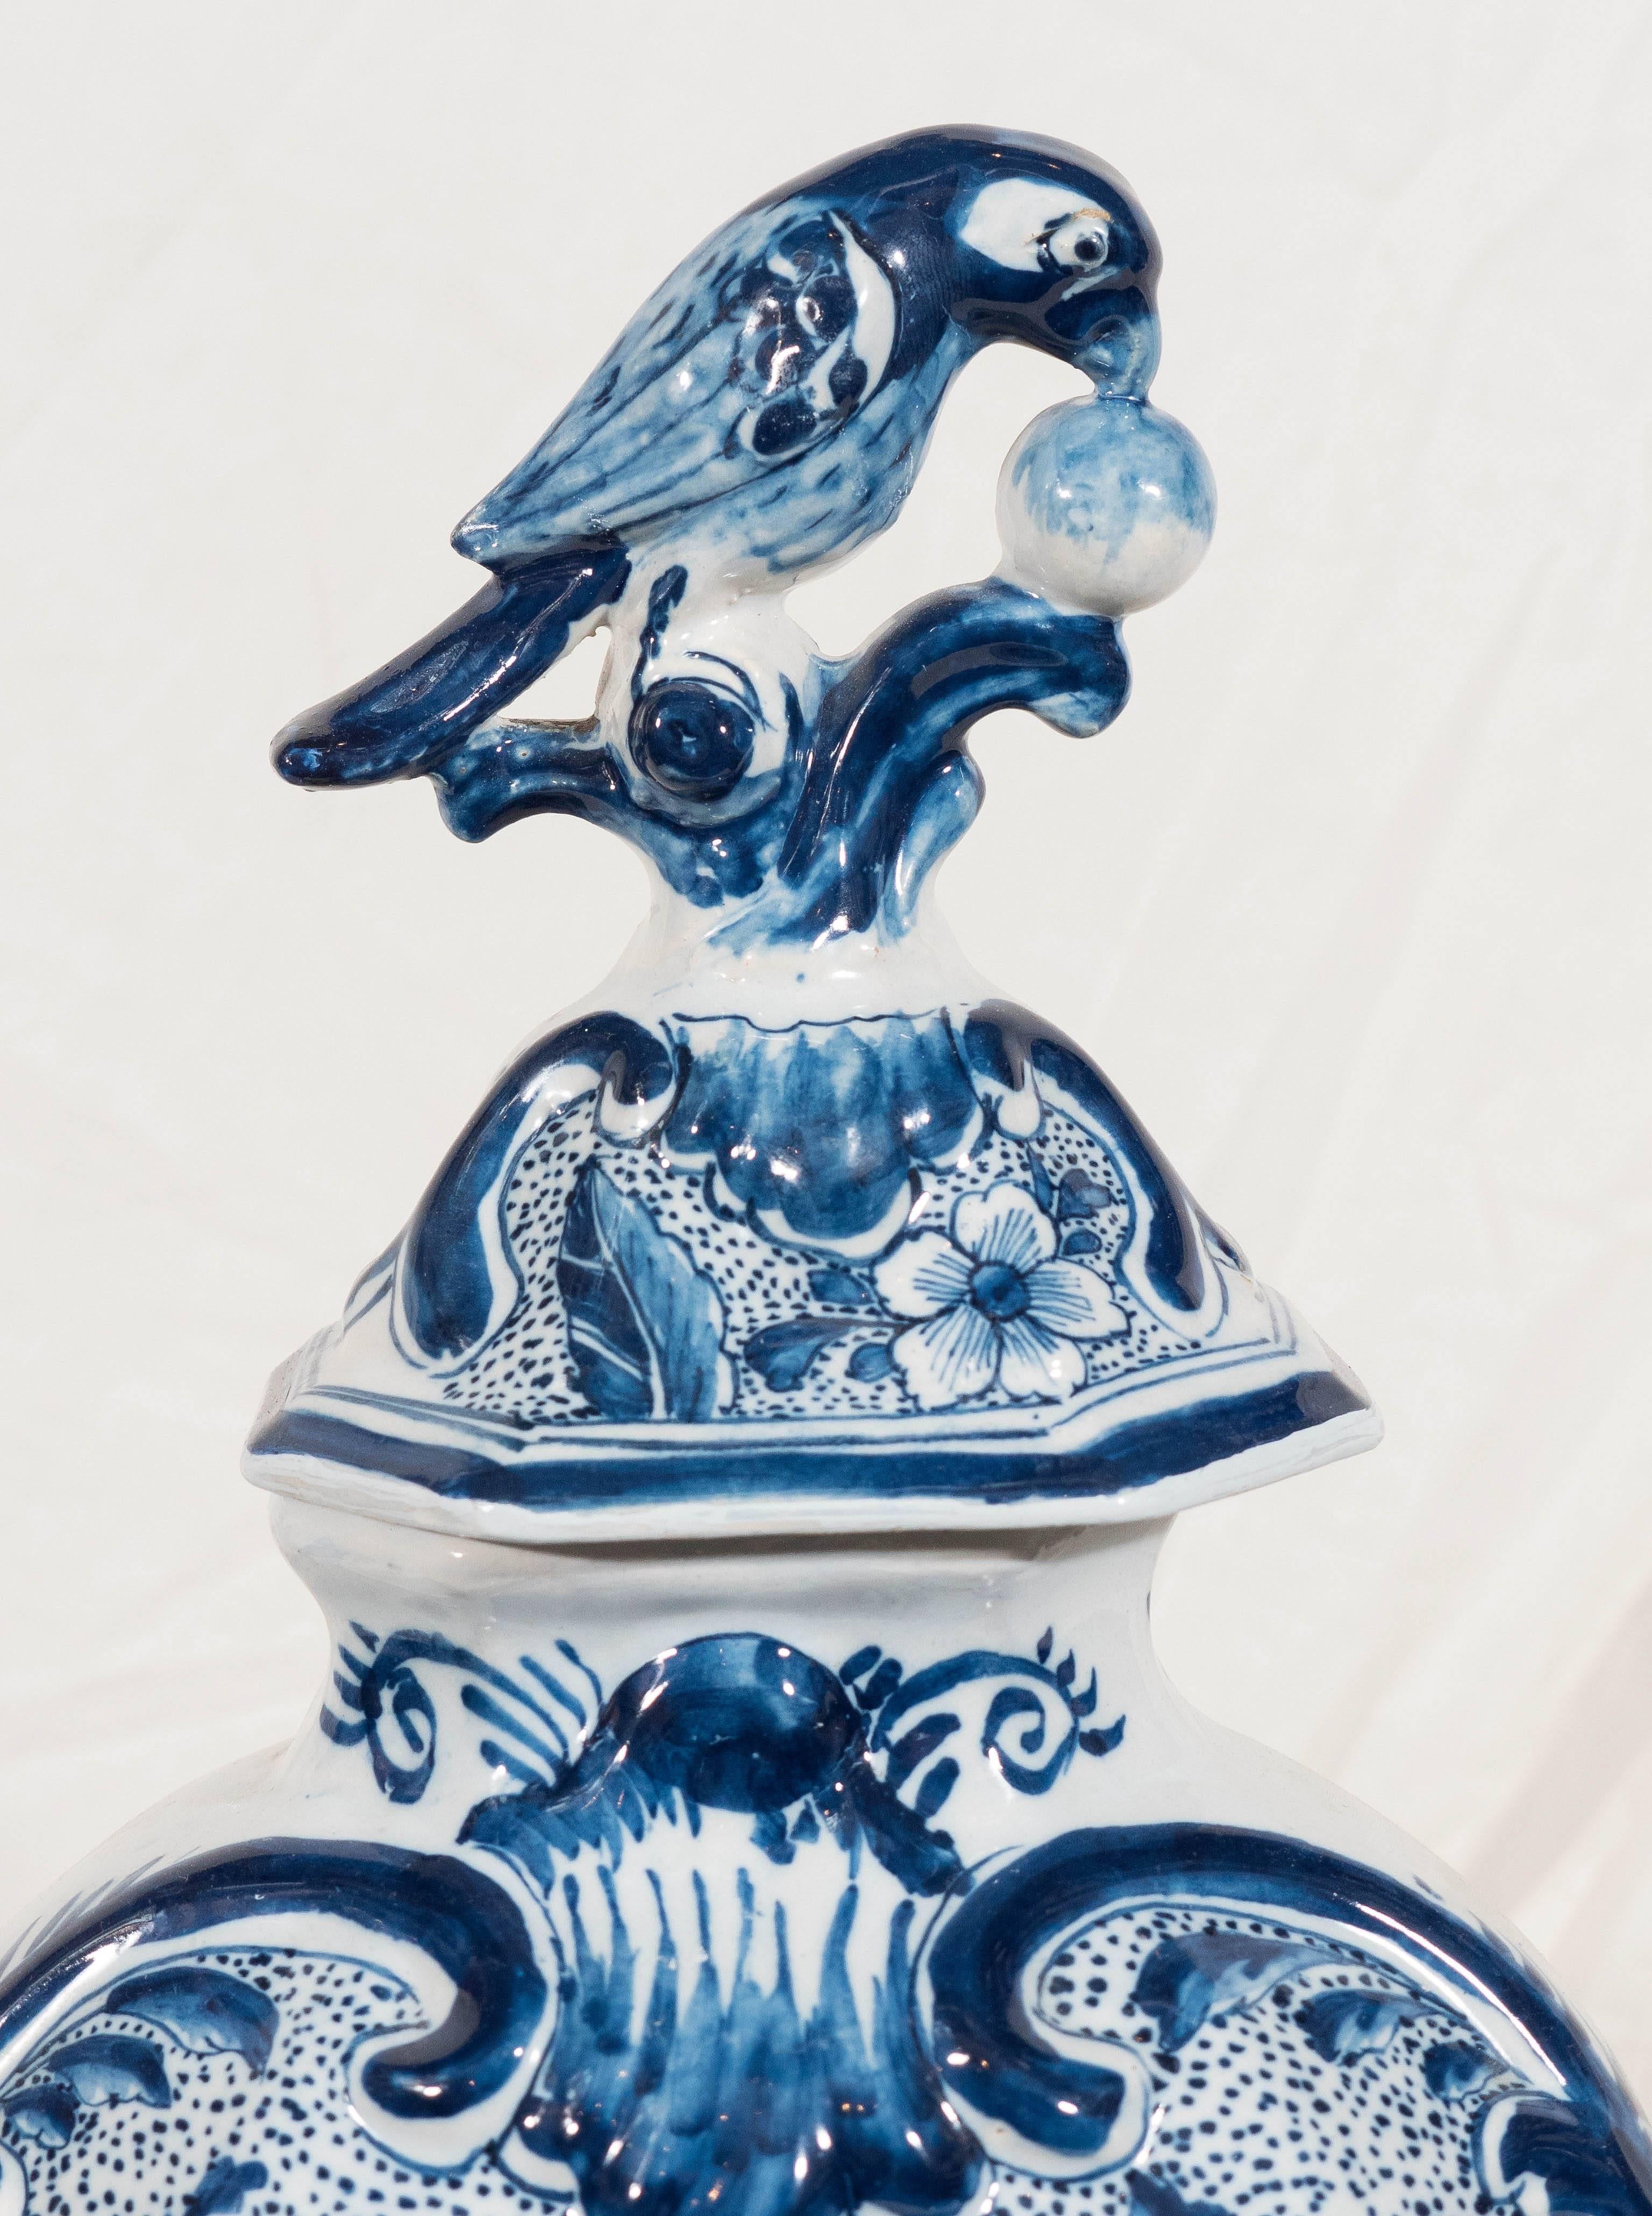 A Dutch Delft Blue and White covered vase decorated with a bouquet of flowers
on a blue speckled ground. The cover is topped by a traditional bird and ball
finial. The back of the vase is decorated with a single Artemisia leaf.
We feel that this